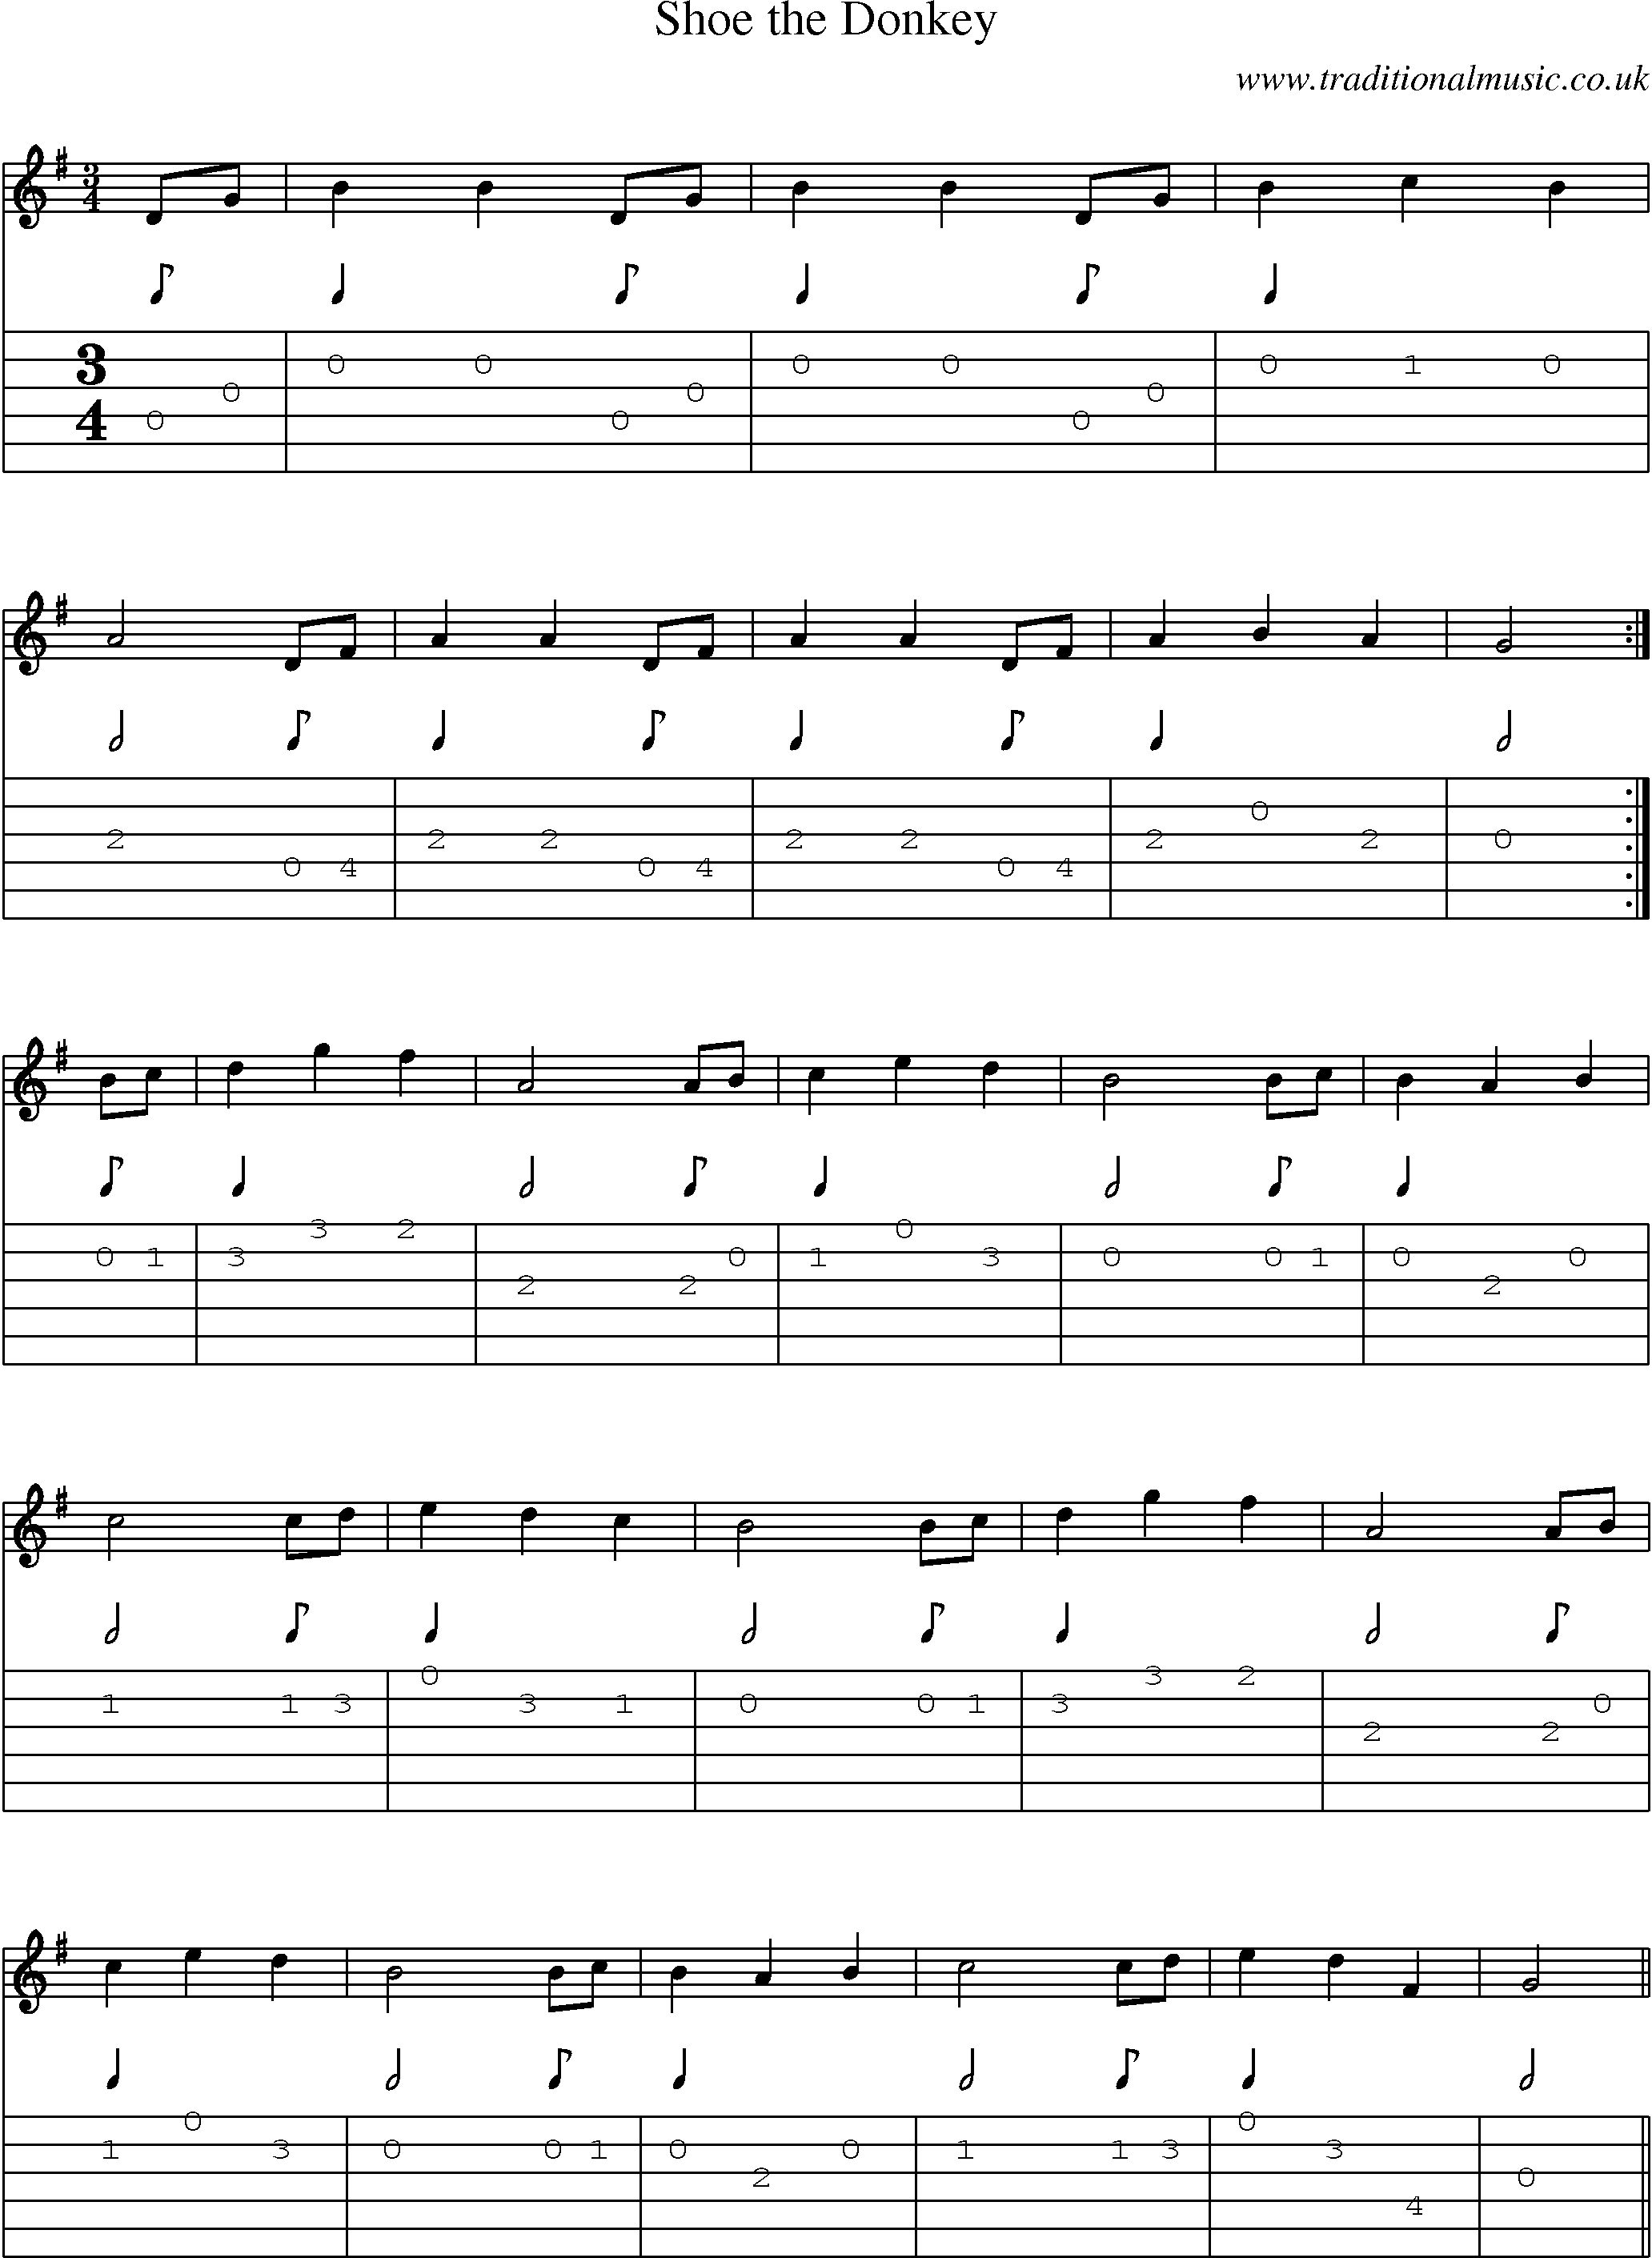 Music Score and Guitar Tabs for Shoe Donkey